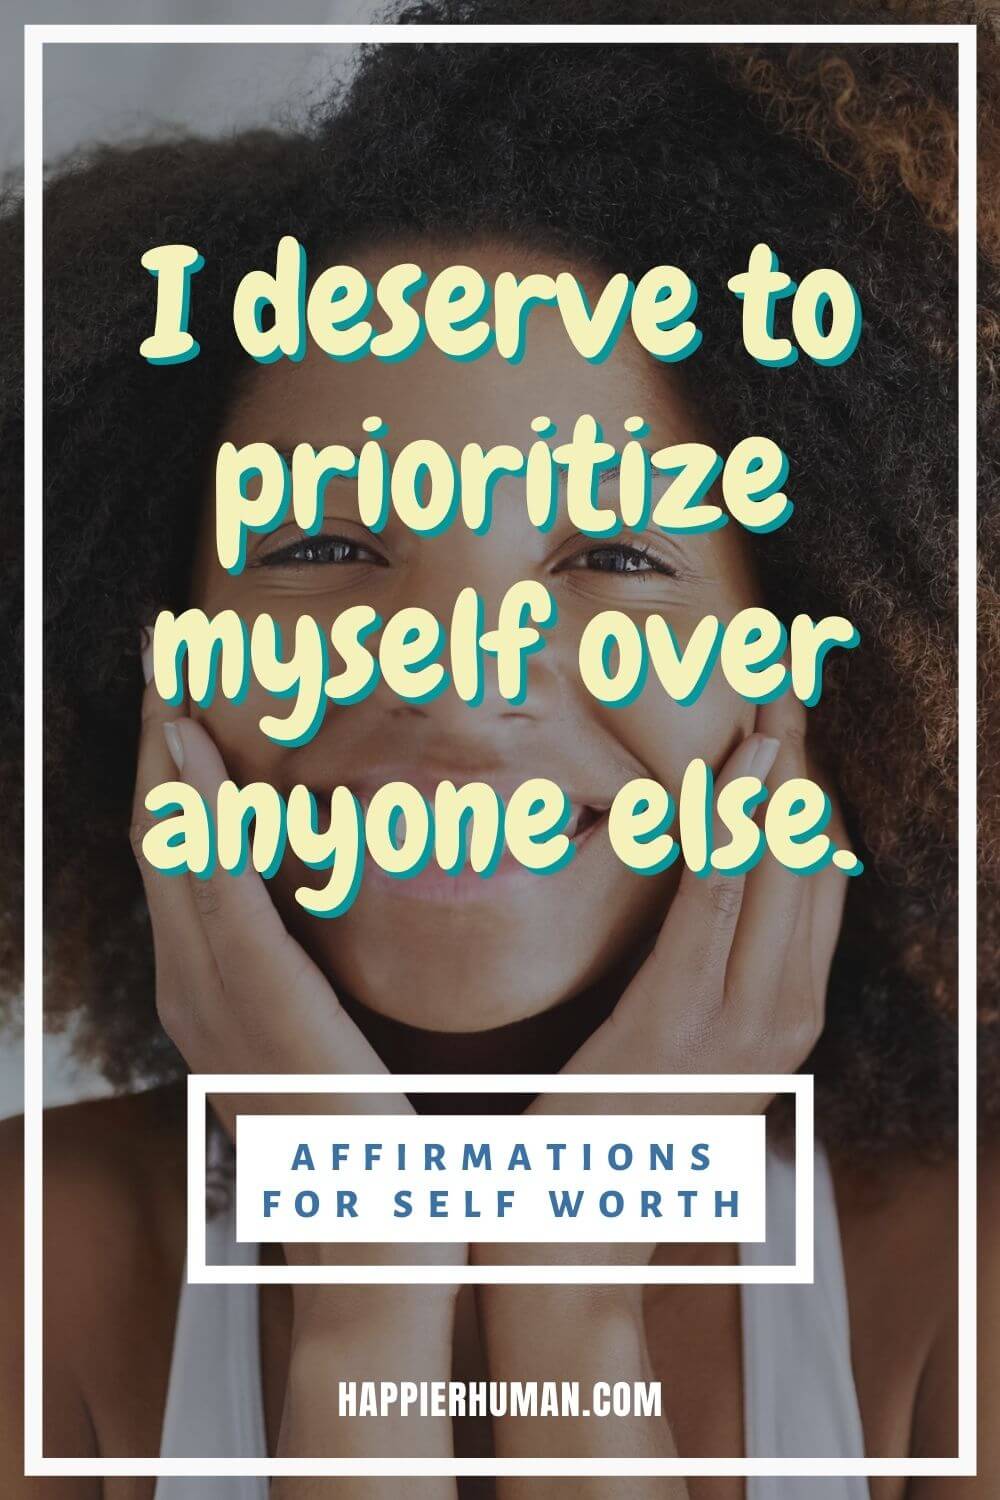 Affirmations for Self Worth - I deserve to prioritize myself over anyone else. | morning affirmations for self-worth | affirmations for self love and healing | affirmations for confidence and success